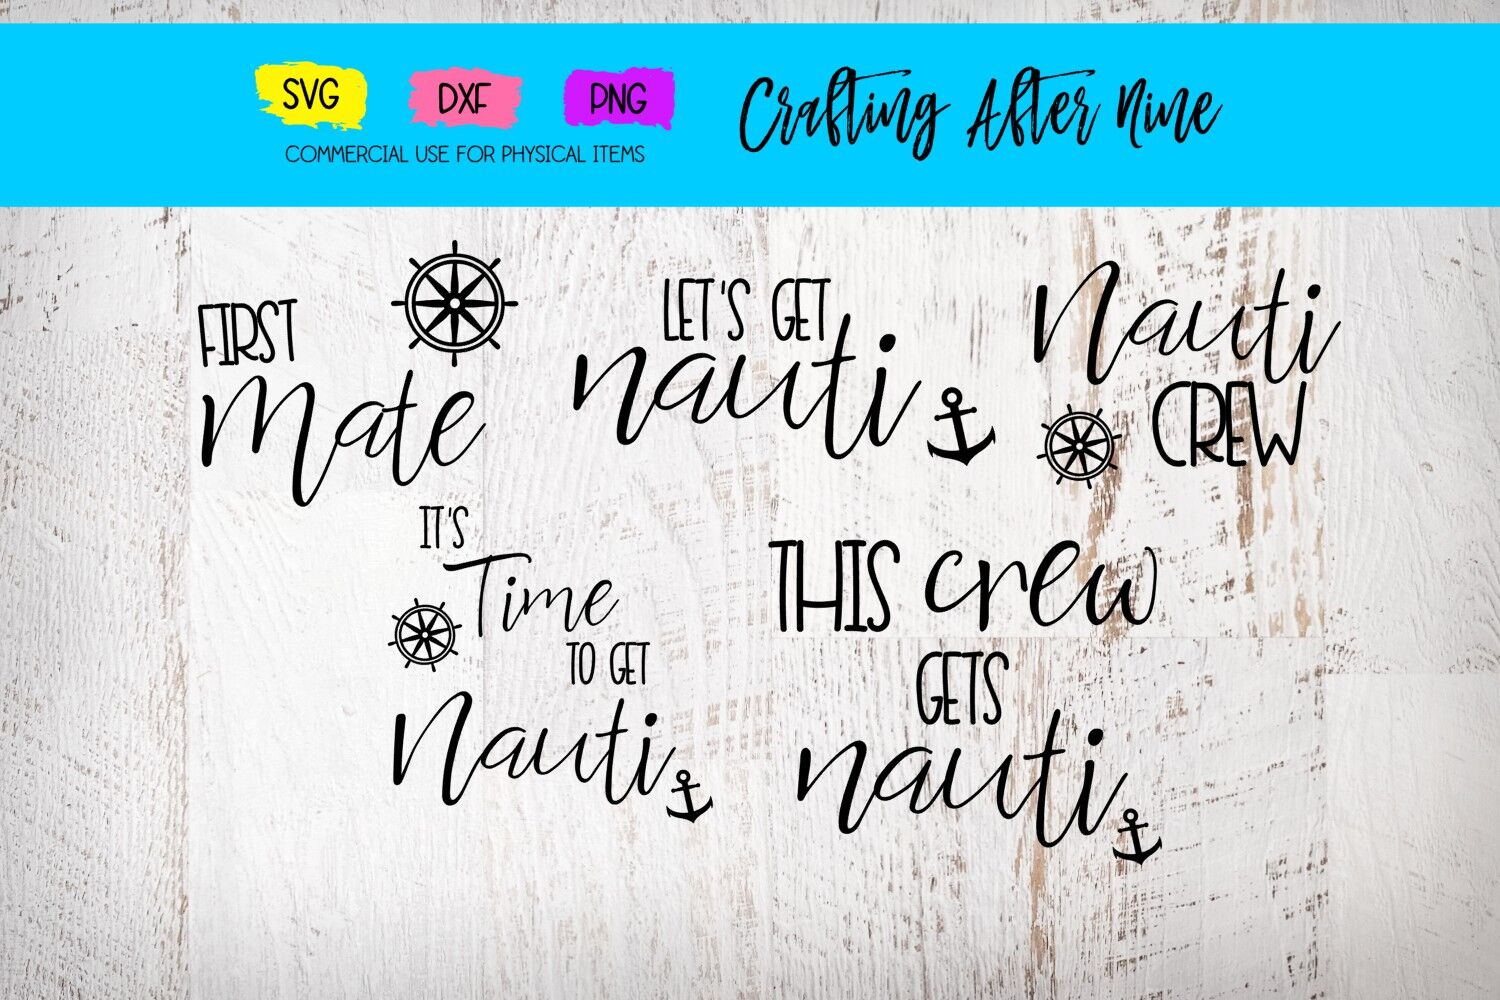 Download Let S Get Nauti Nauti Crew This Crew Gets Nauti Nautical Wedding Party Girls Trip Nautical Birthday Spring Break Vacation Svg Dxf Png By Crafting After Nine Thehungryjpeg Com